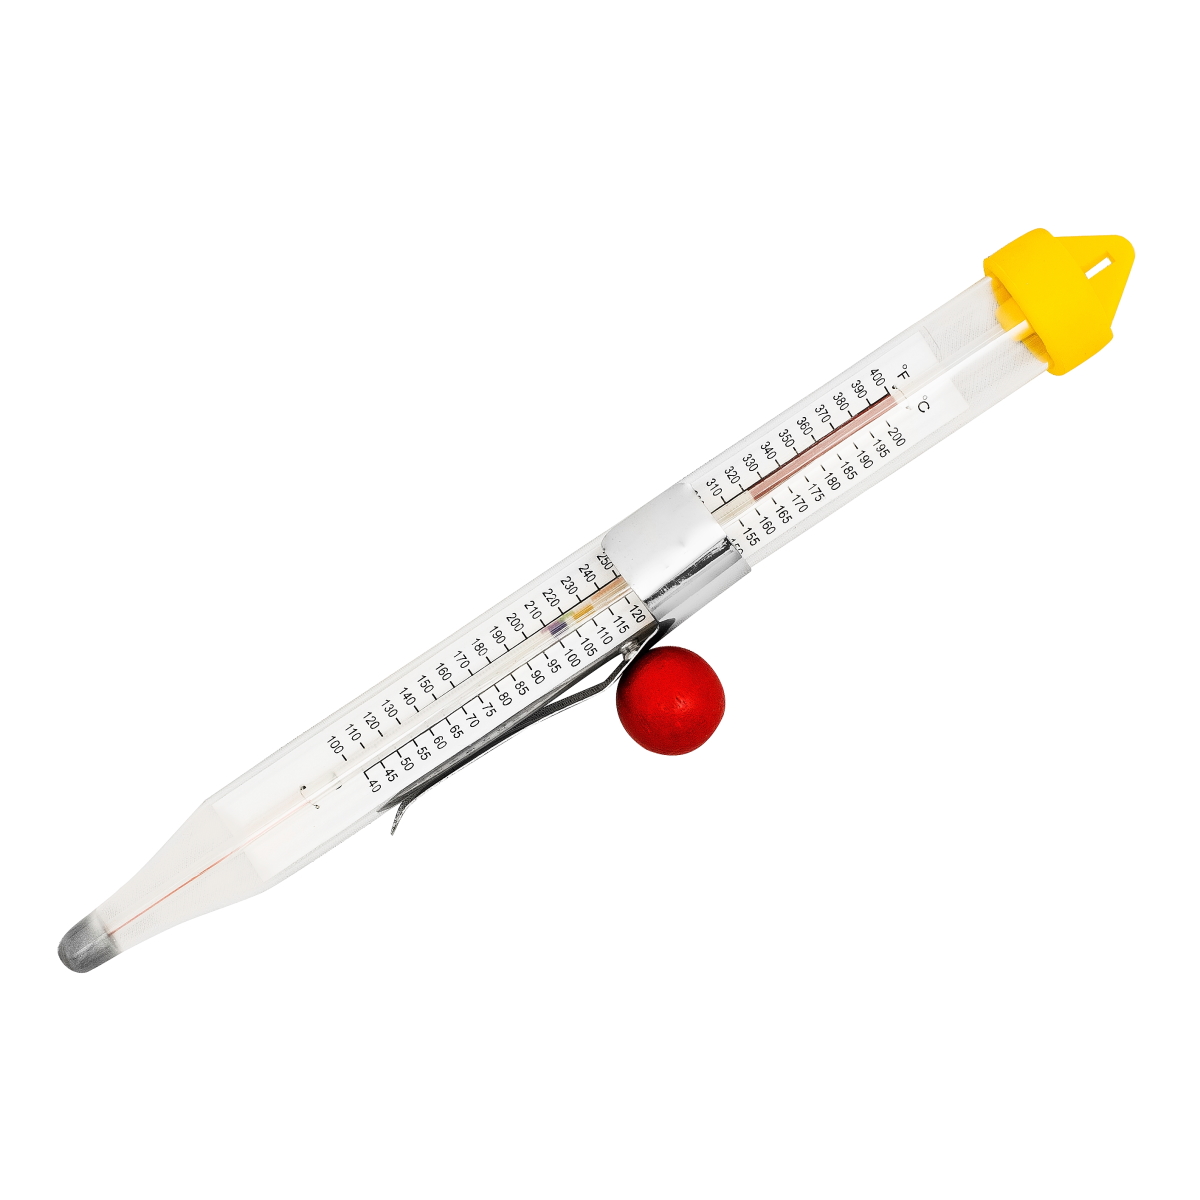  Avanti Glass Tube Deep Fry/Candy Thermometer